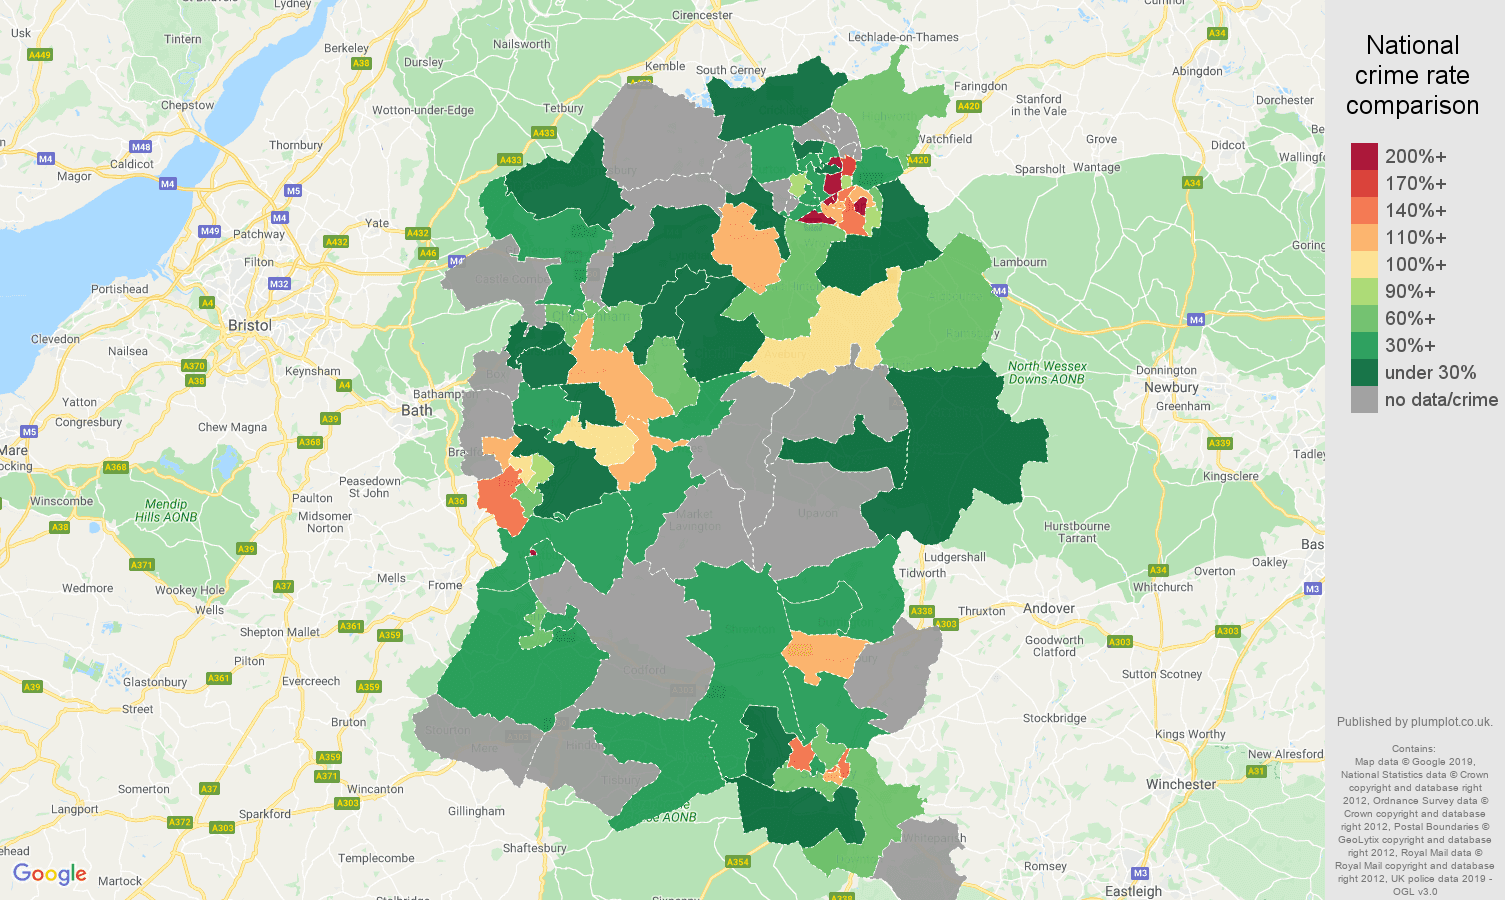 Wiltshire possession of weapons crime rate comparison map